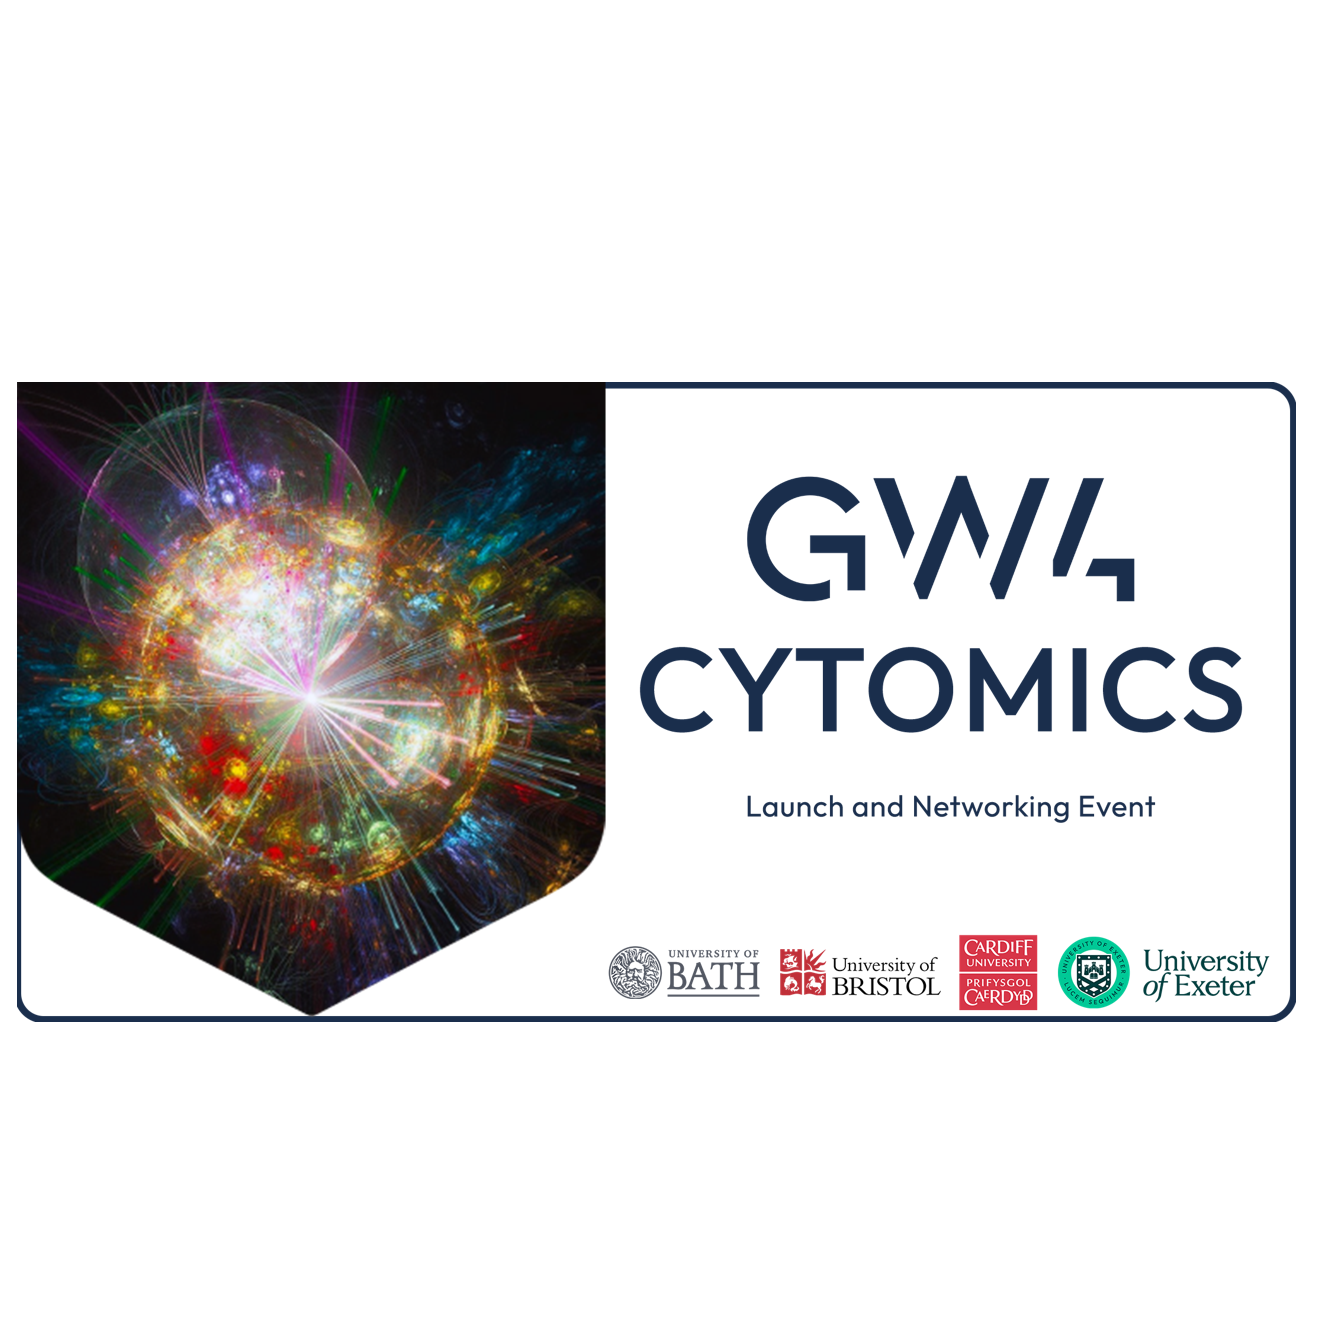 GW4 Cytometry Networking Group: Fostering Excellence in Research and Collaboration thumbnail